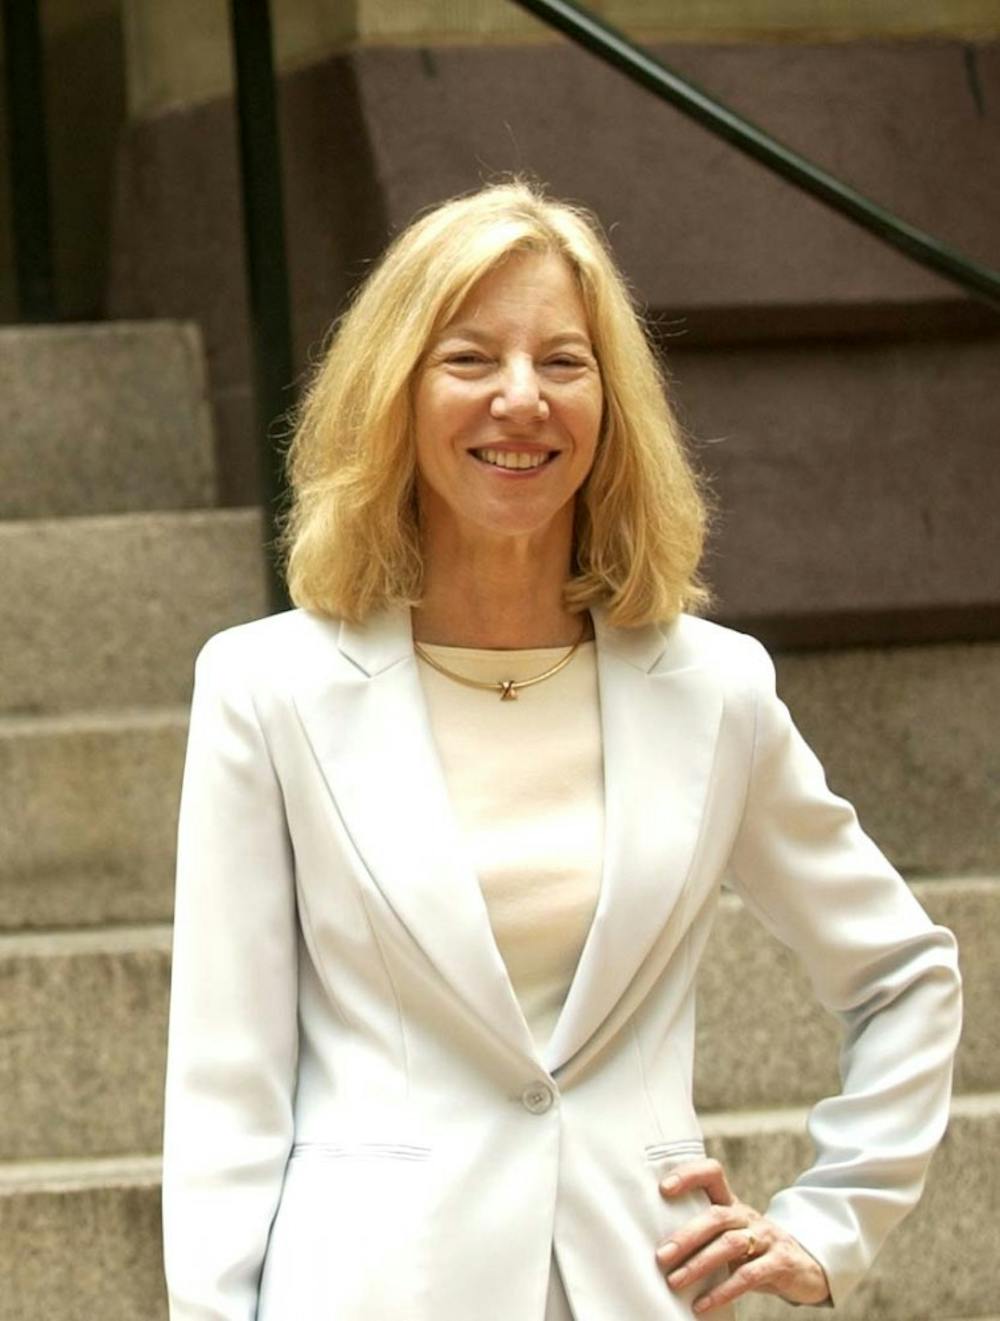 New Penn President Amy gutmann on her first day in office outside college hall